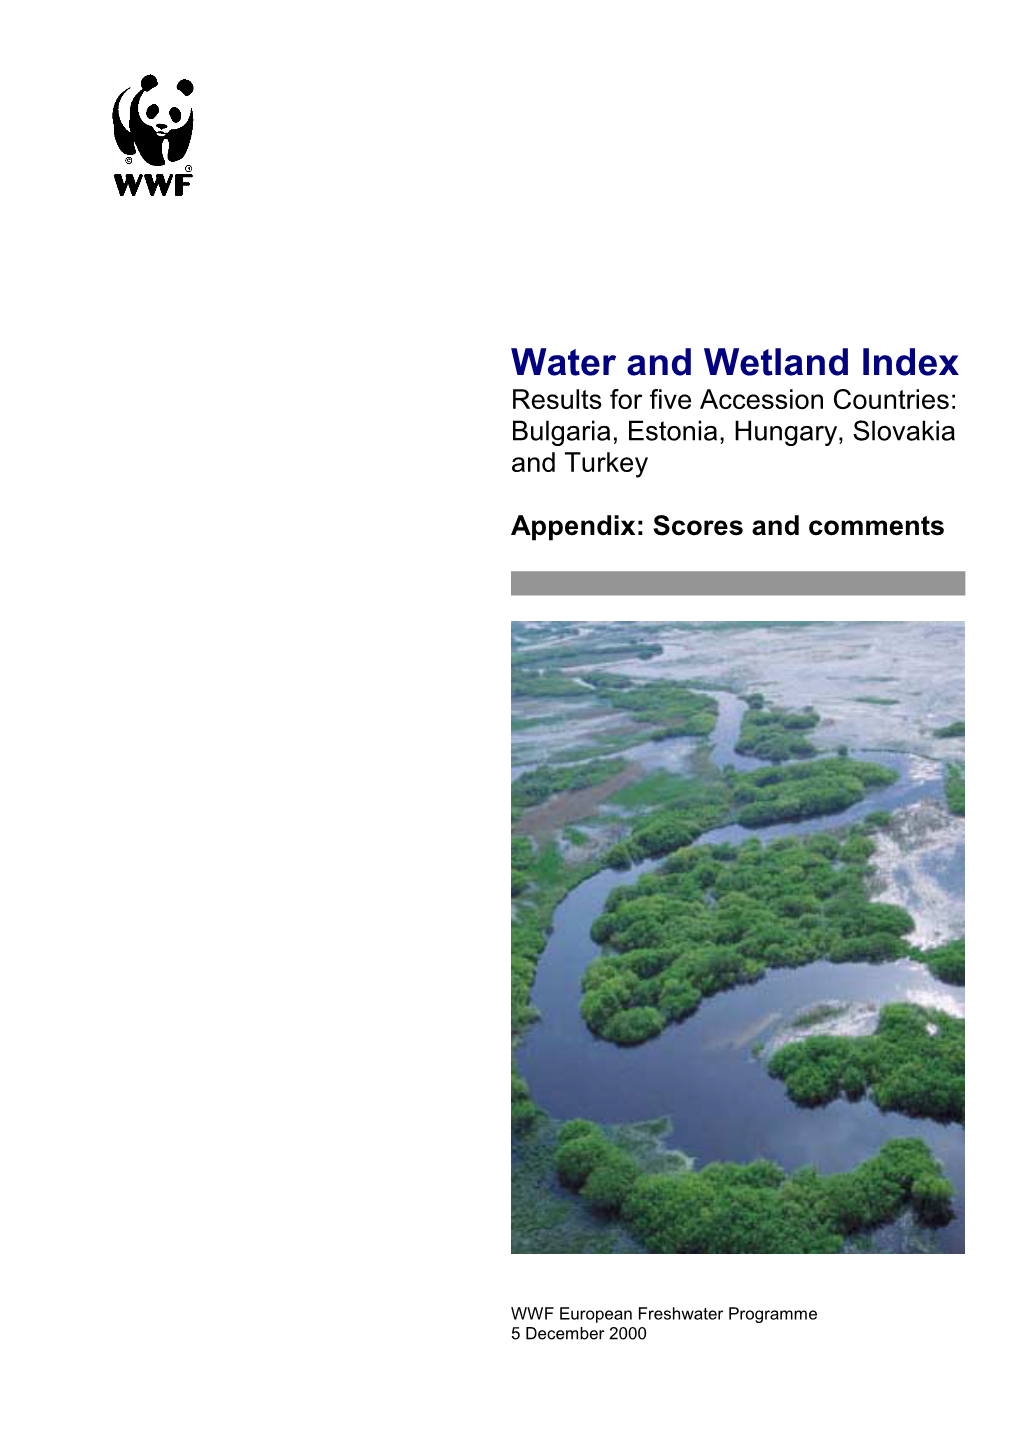 Water and Wetland Index Results for Five Accession Countries: Bulgaria, Estonia, Hungary, Slovakia and Turkey